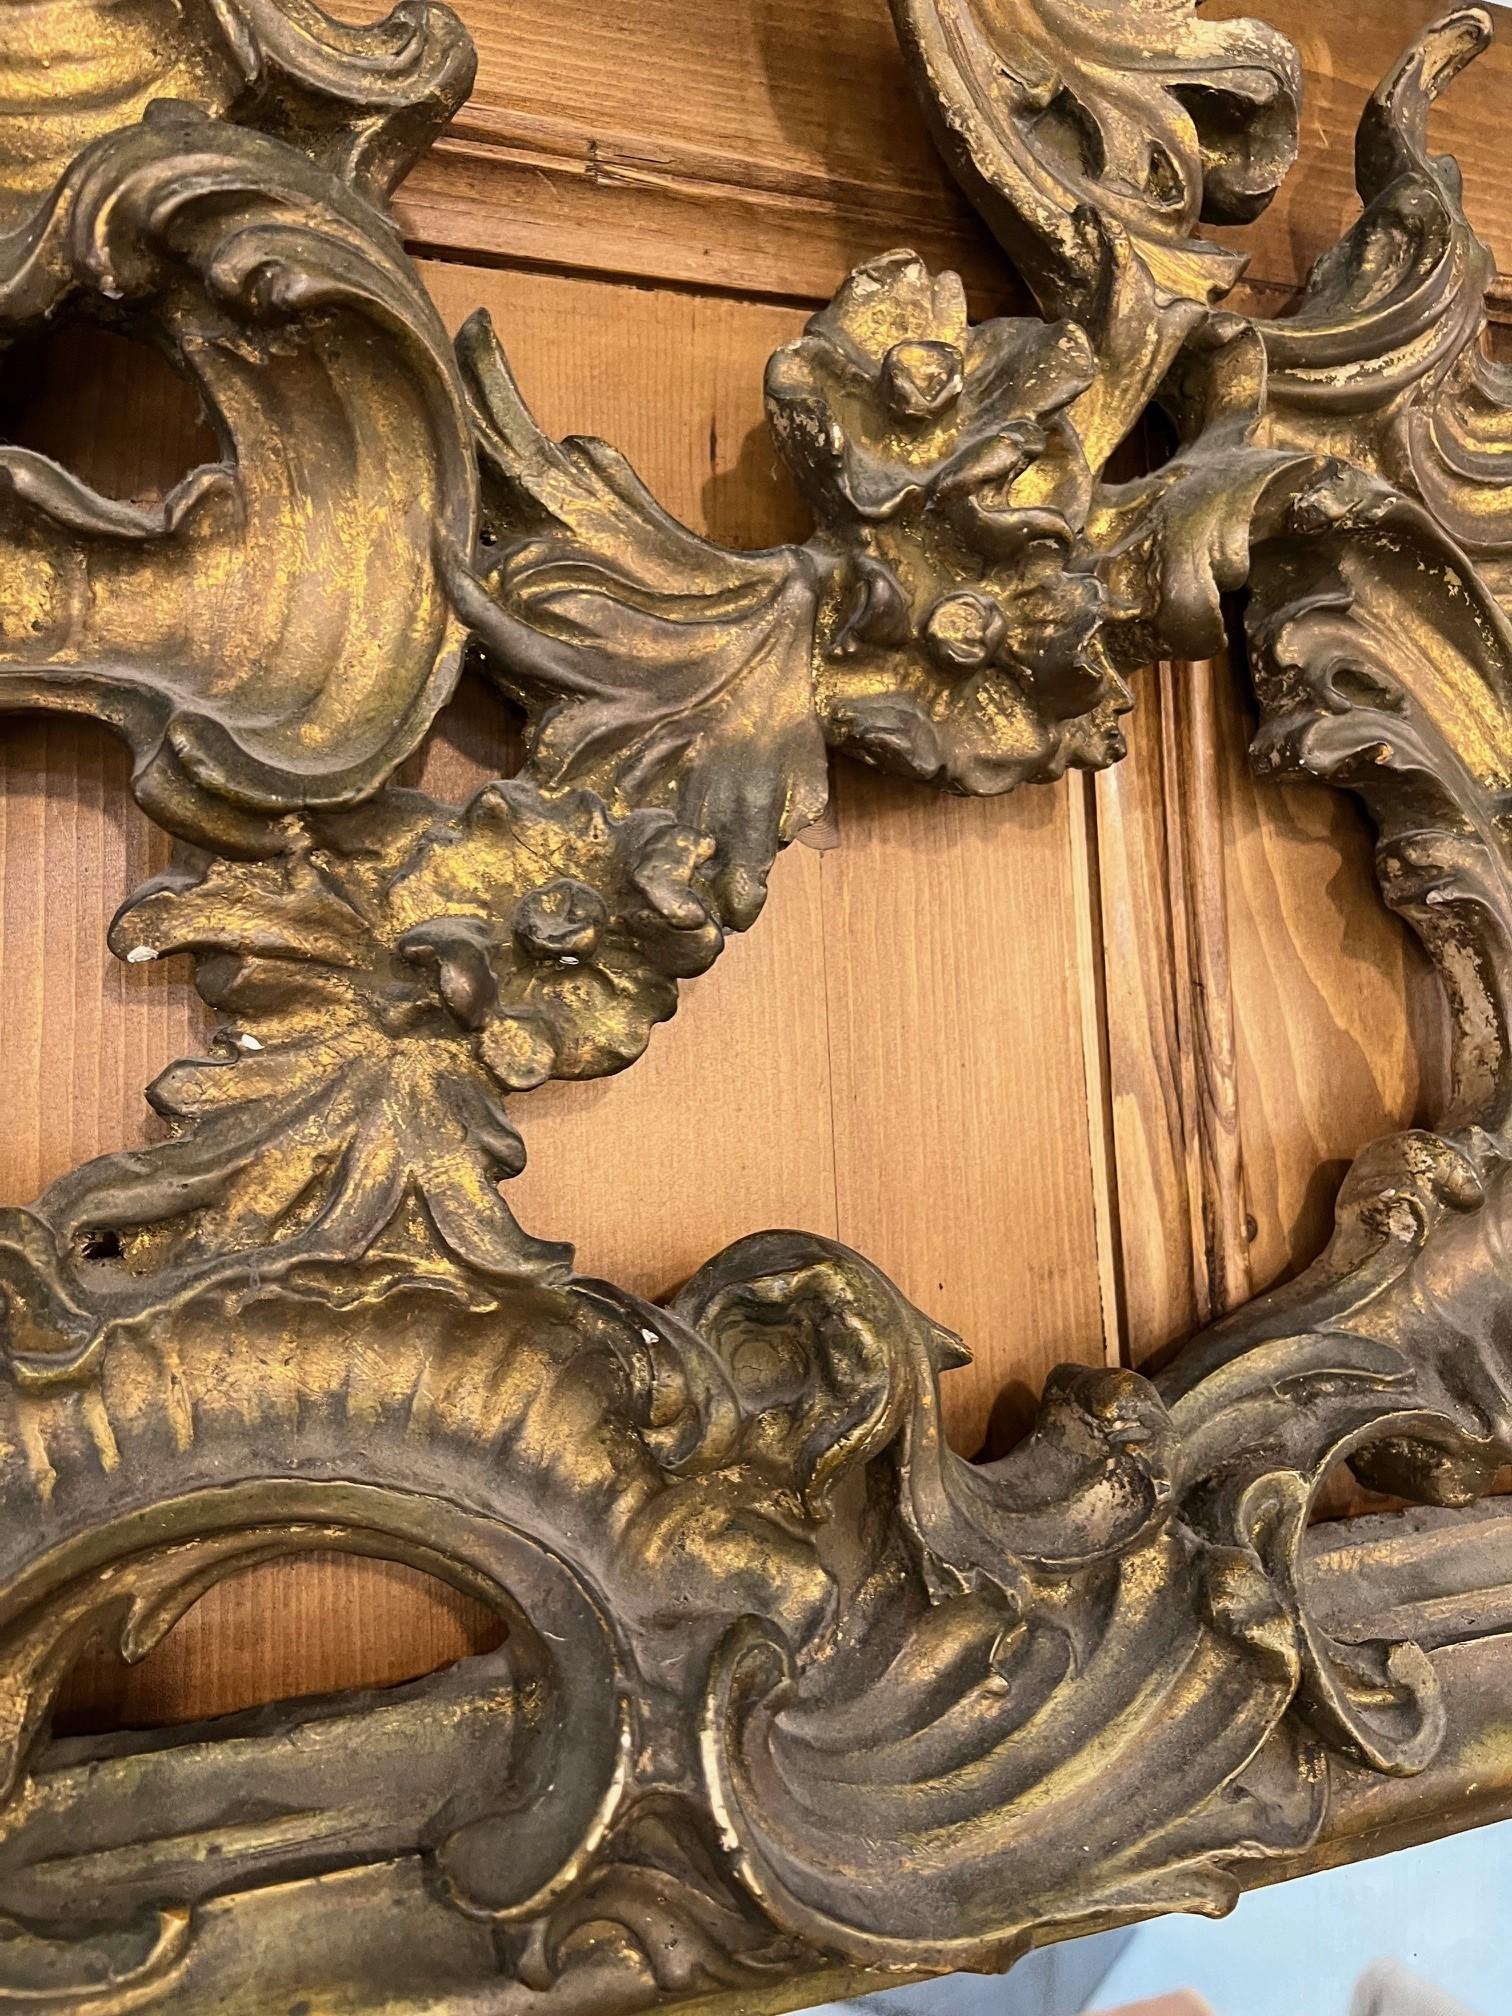 A wonderful late 19th century antique French gilt wall mirror. This mirror has a very elaborate gesso frame that is simple amazing. Overall in good condition but does need some repairs to the frame shown in the photos and video. 